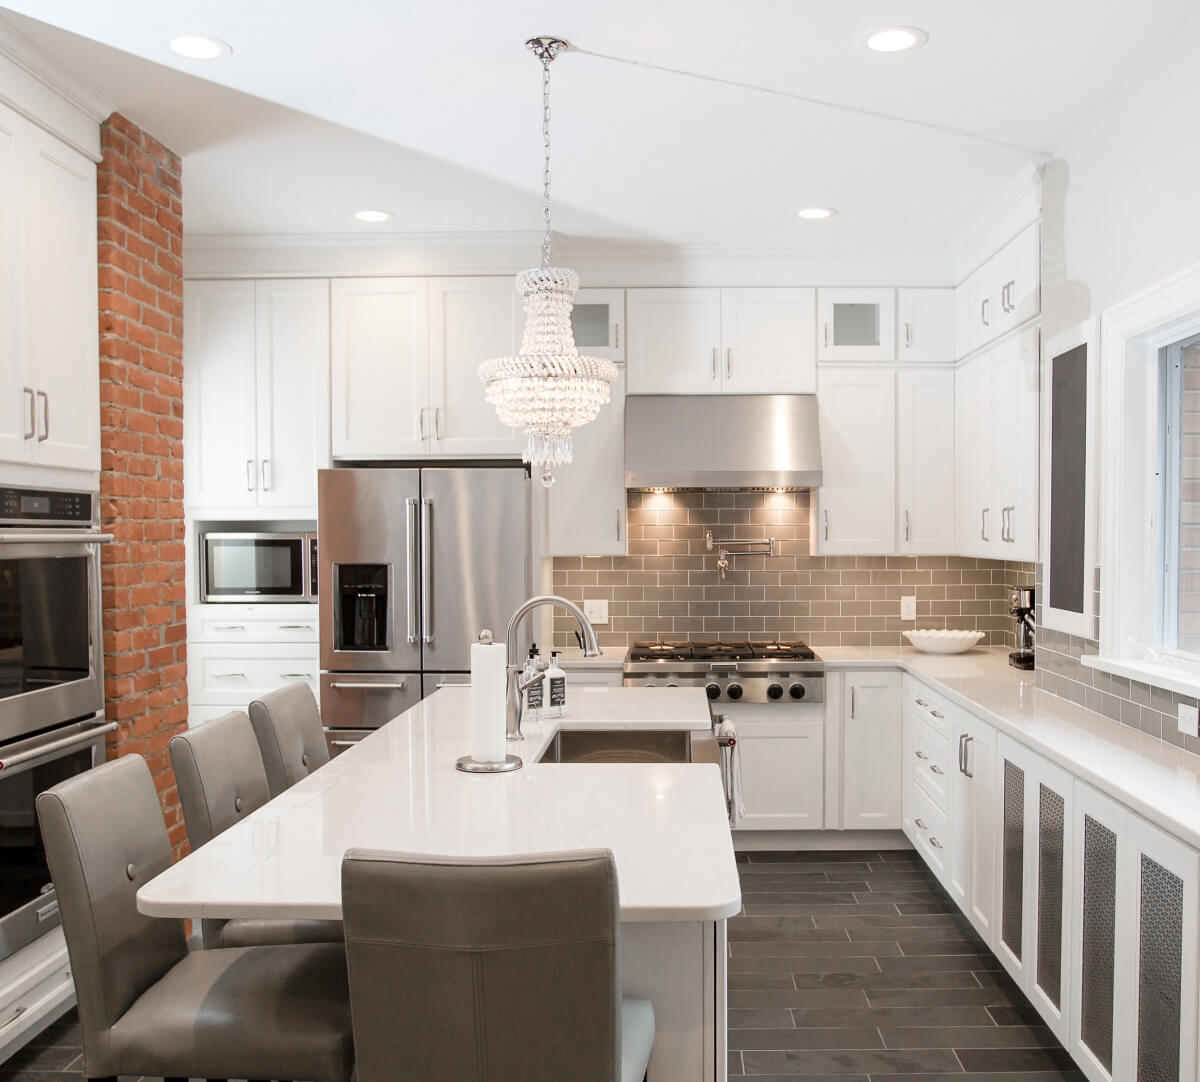 A white on white kitchen with Dura Supreme cabinetry and a large chandalier over the kitchen island.